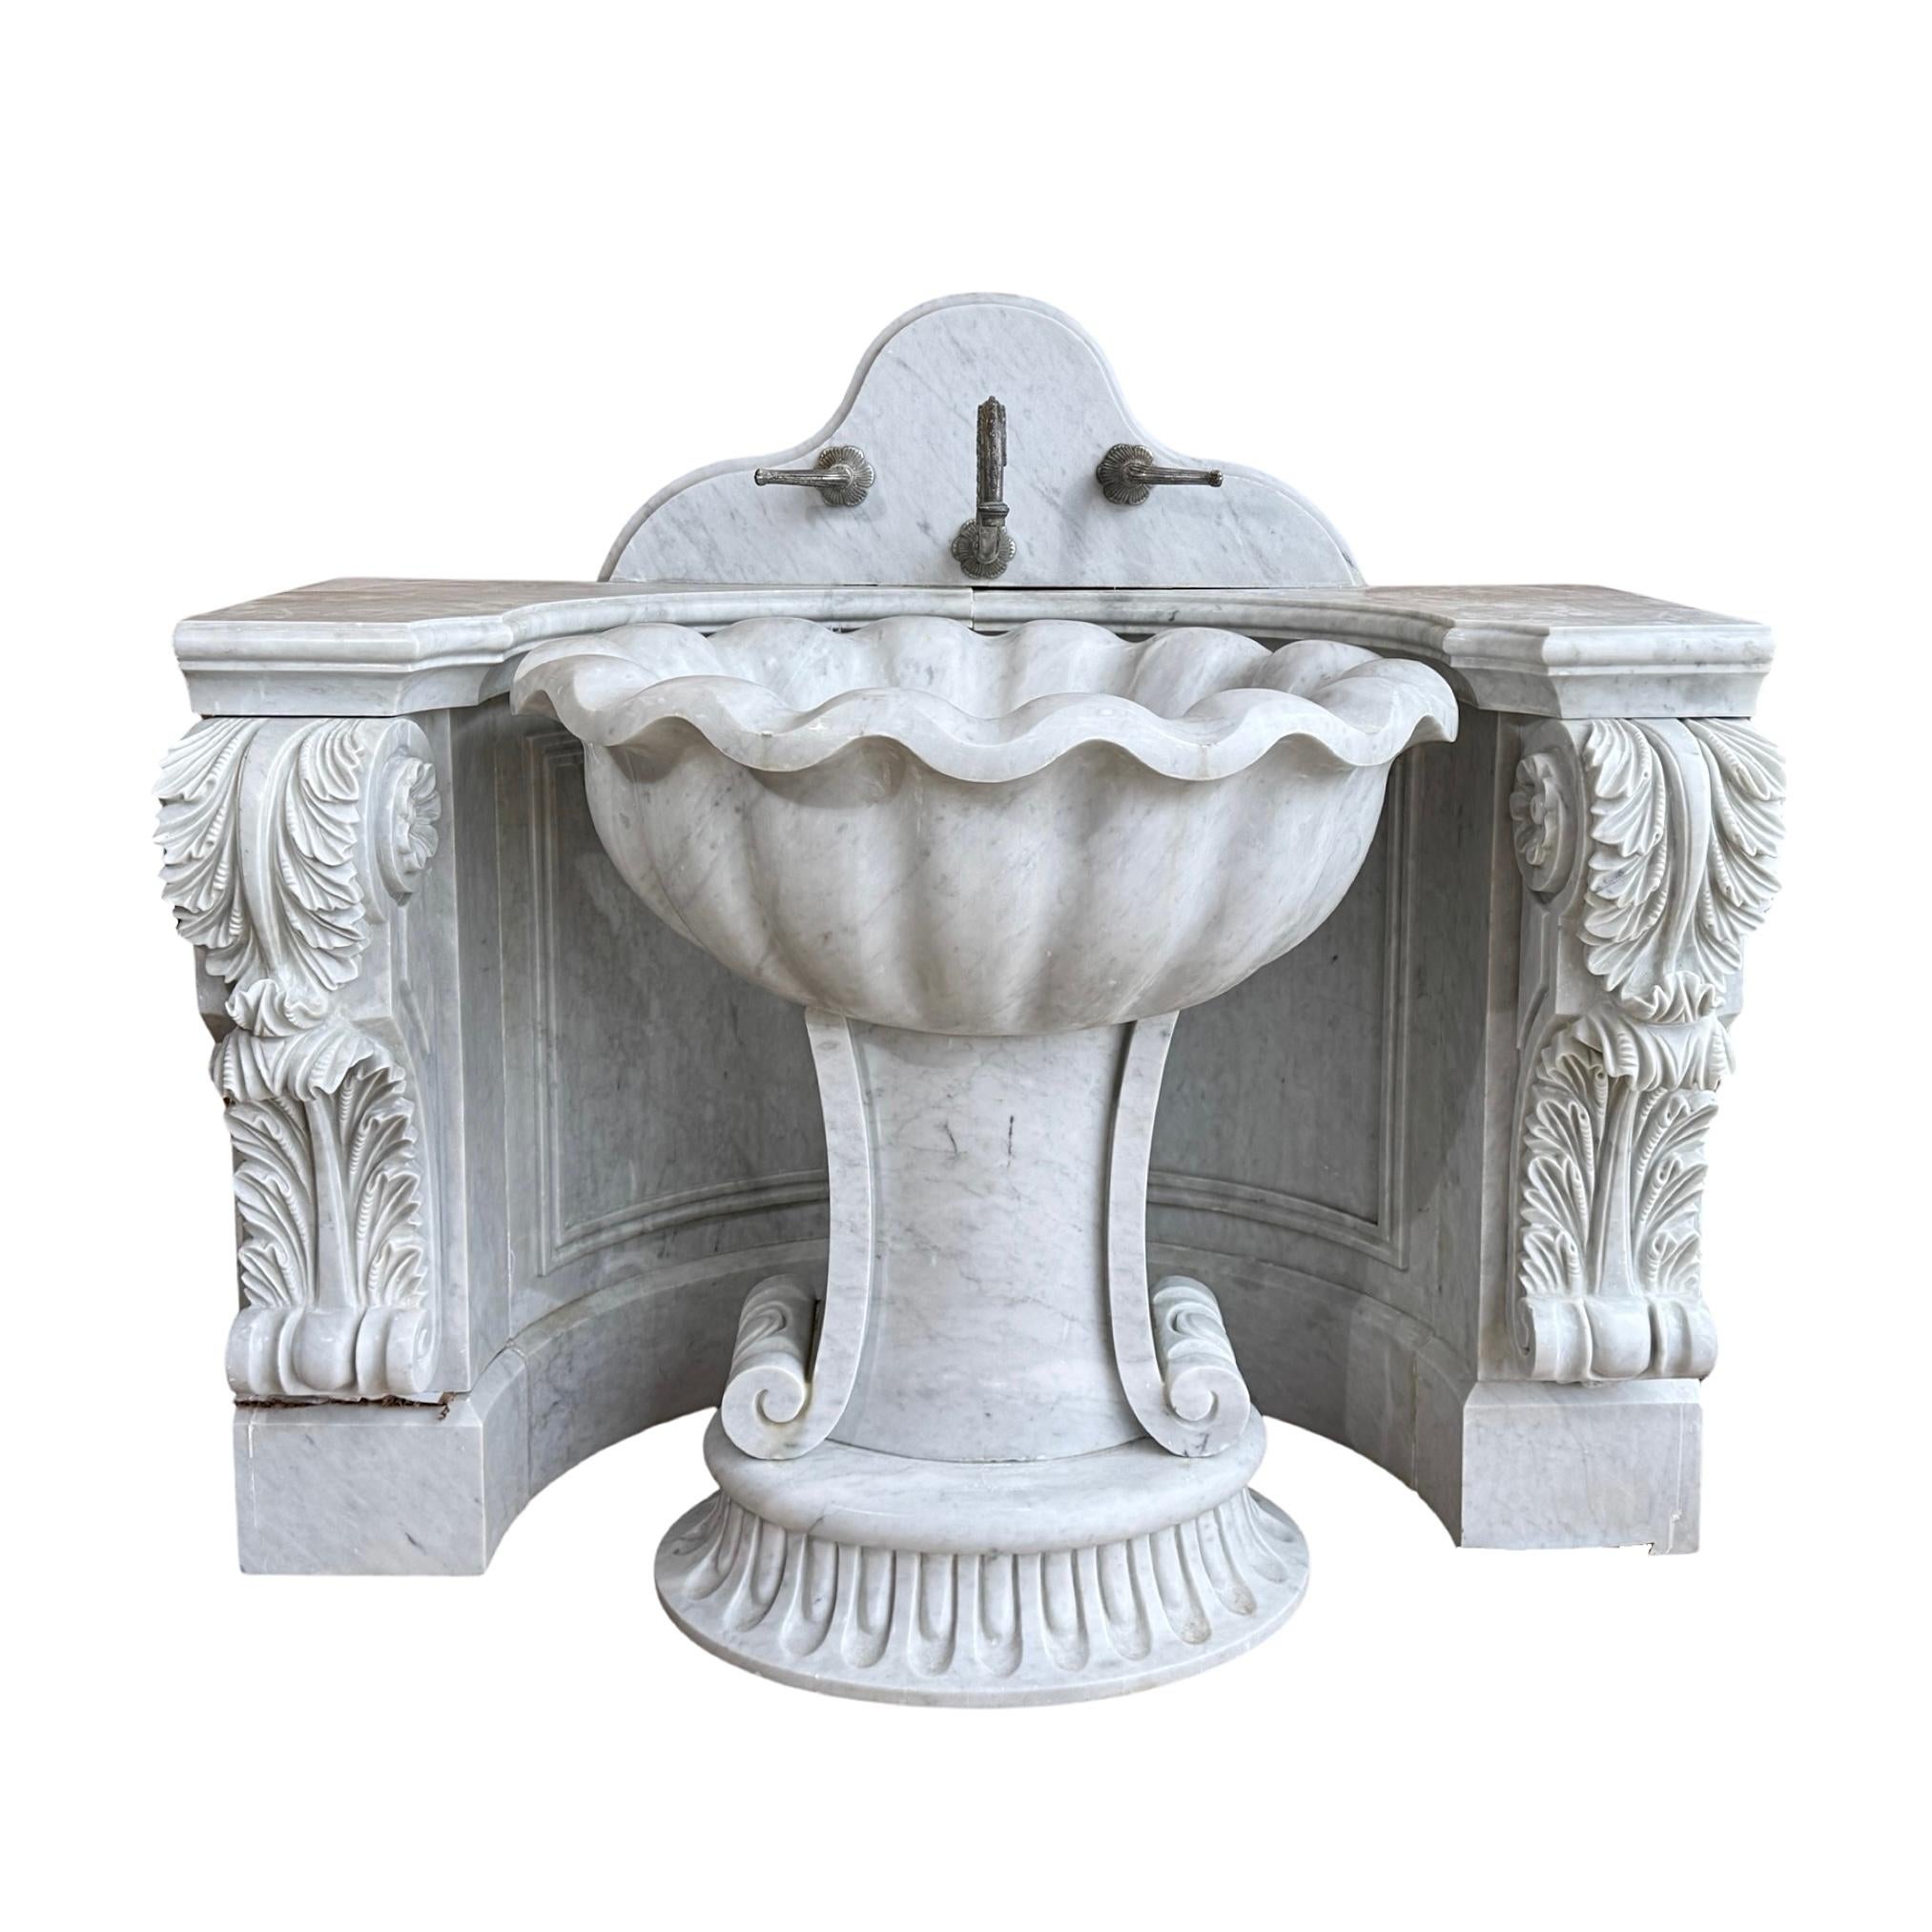 This stunning Italian White Carrara Marble Wall Sink is a 19th-century masterpiece, beautifully hand-carved in the Louis XVI style. The intricate carvings throughout the sink add a touch of elegance to any bathroom. The connecting wall base that